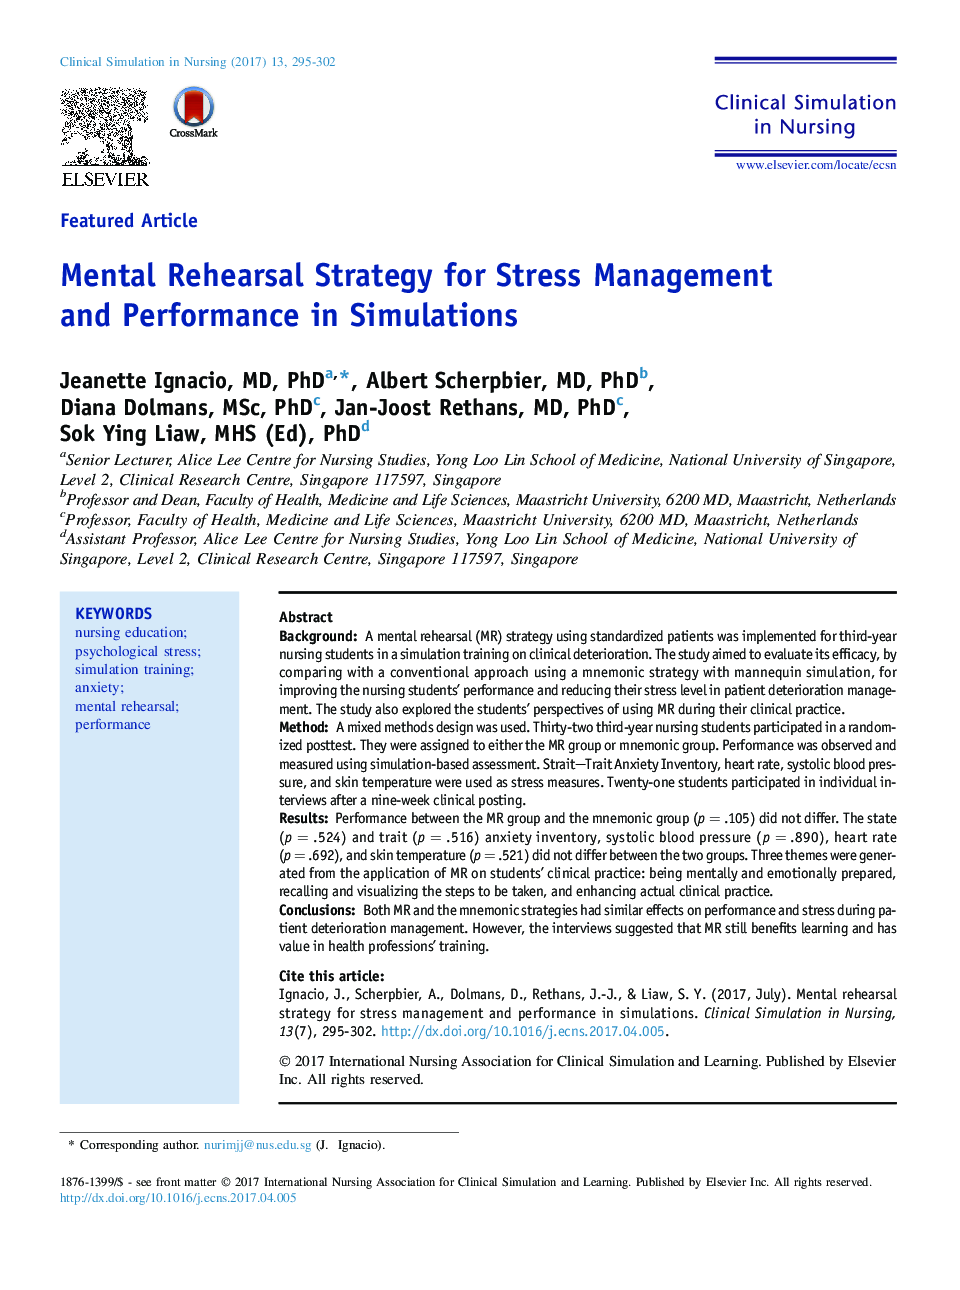 Mental Rehearsal Strategy for Stress Management and Performance in Simulations